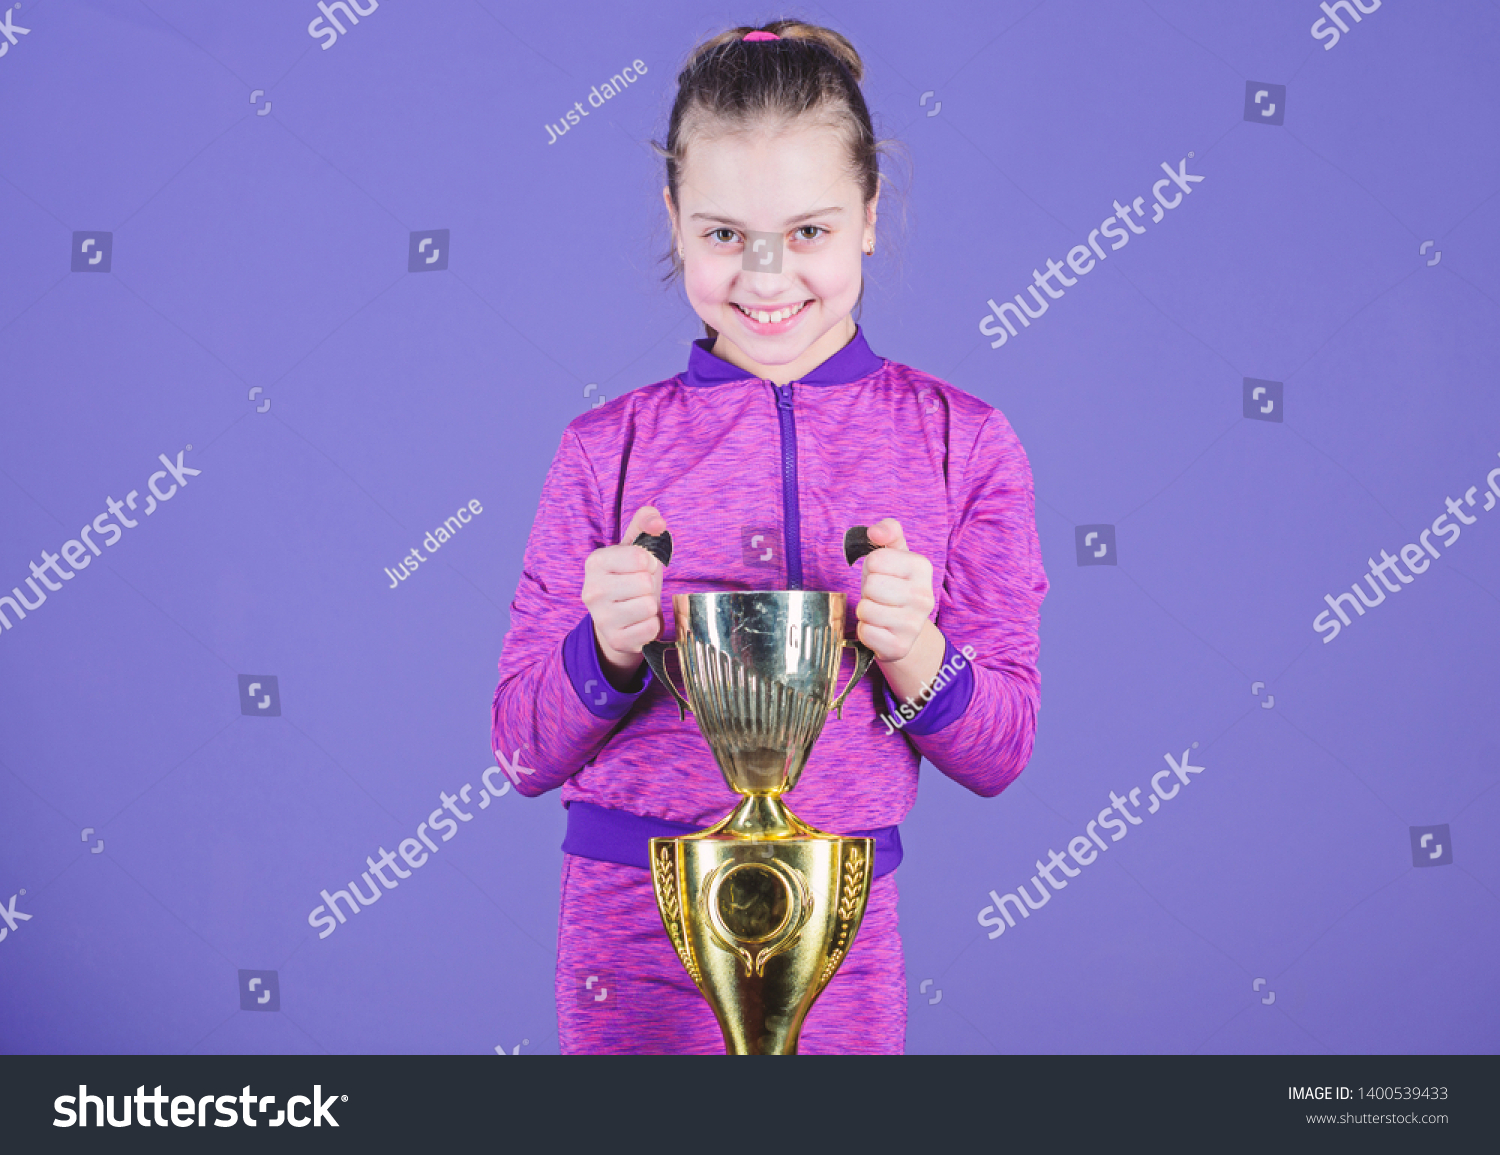 Celebrating childrens achievements great and small. Sport achievement. Celebrate victory. Girl hold golden goblet. Importance of capturing evidence of kids progress. Proud of her achievement. #1400539433